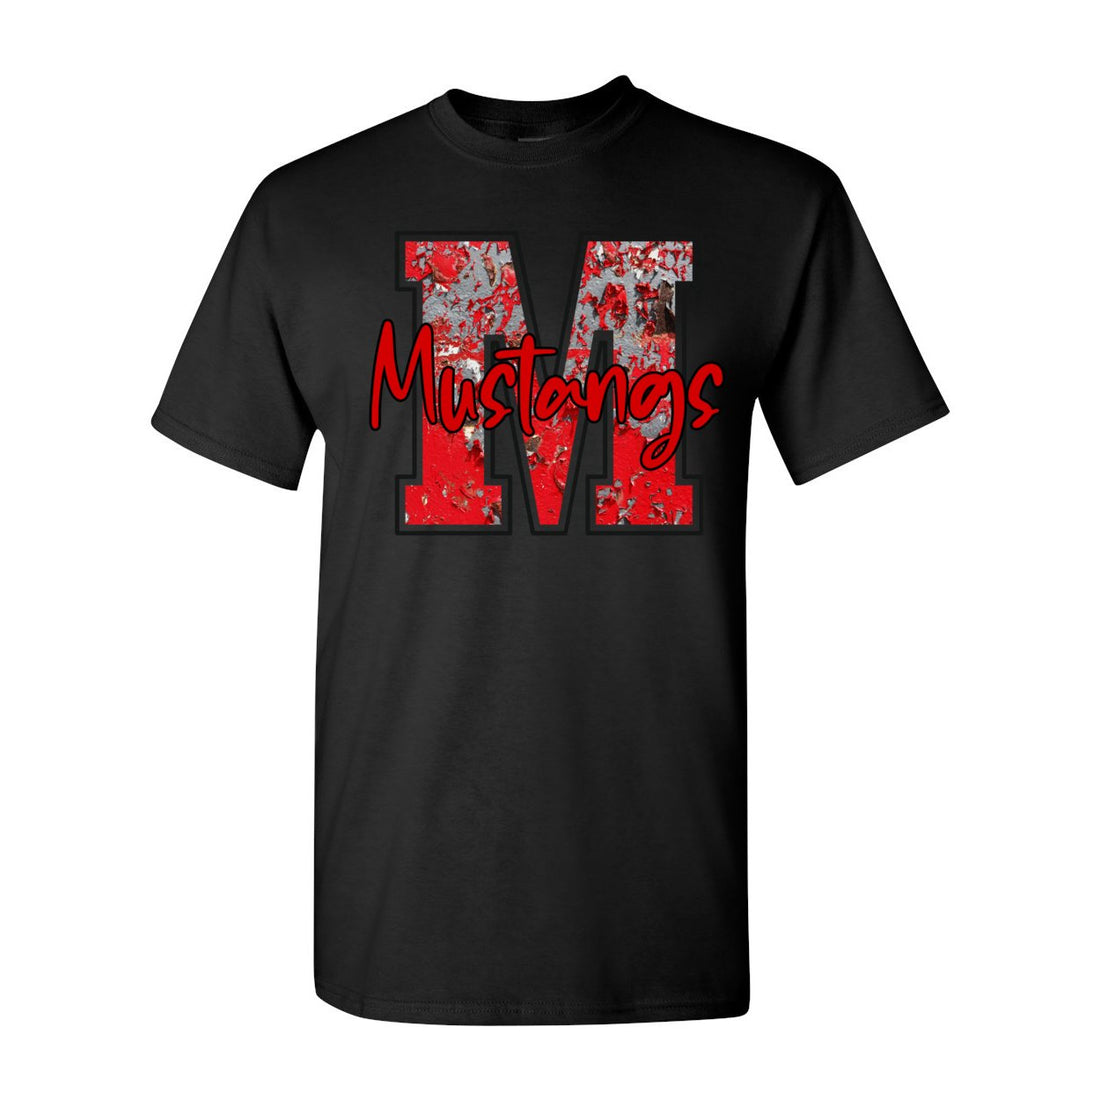 M is for Mustangs Heavy Cotton T-Shirt - T-Shirts - Positively Sassy - M is for Mustangs Heavy Cotton T-Shirt